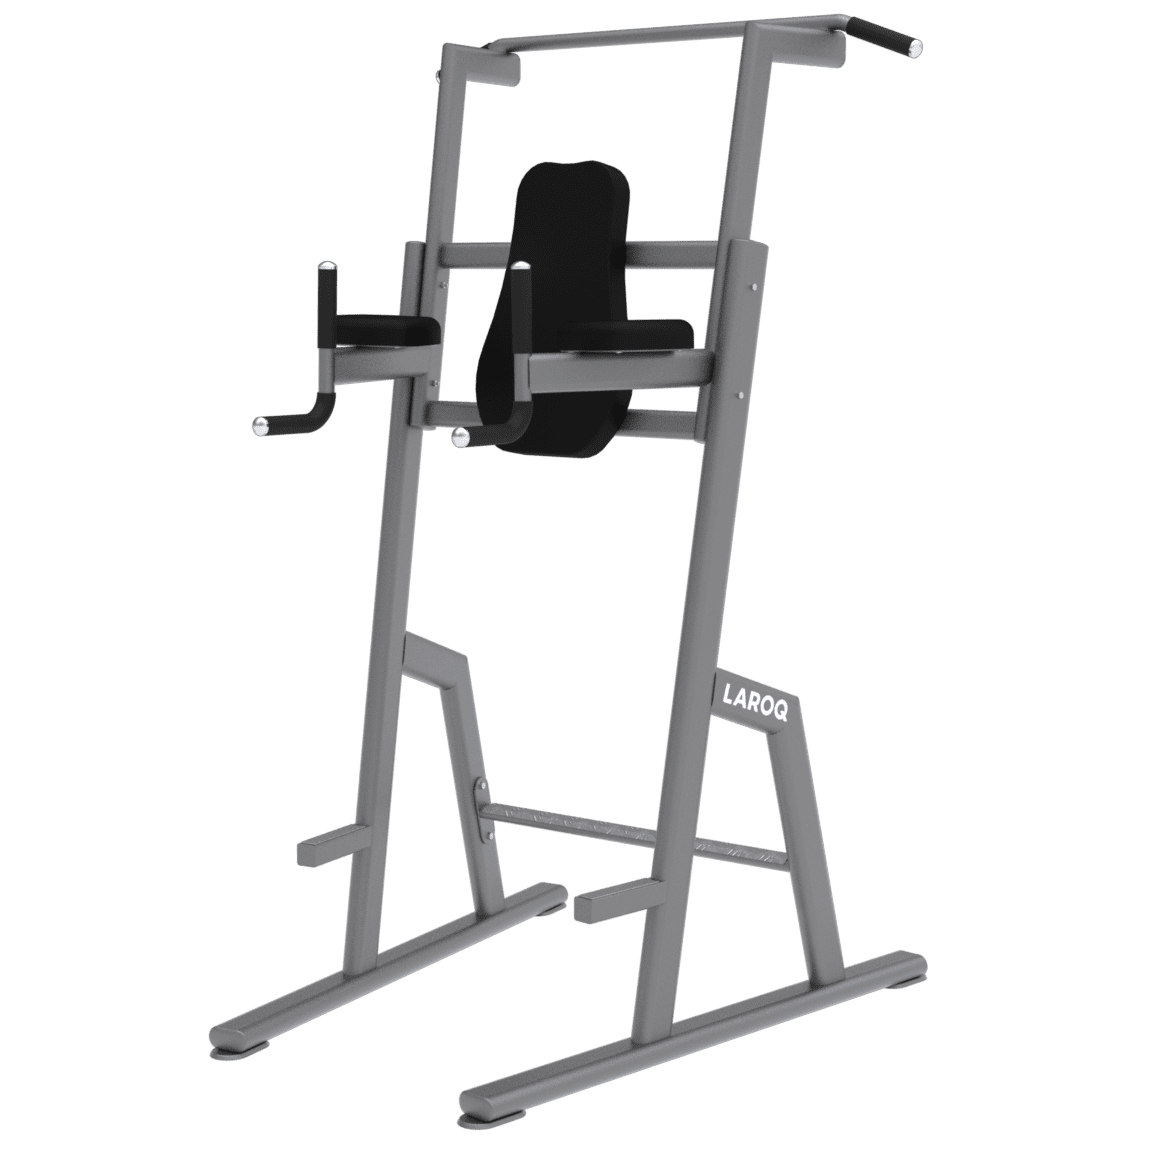 Chaise Romaine Musculation – Fit Super-Humain